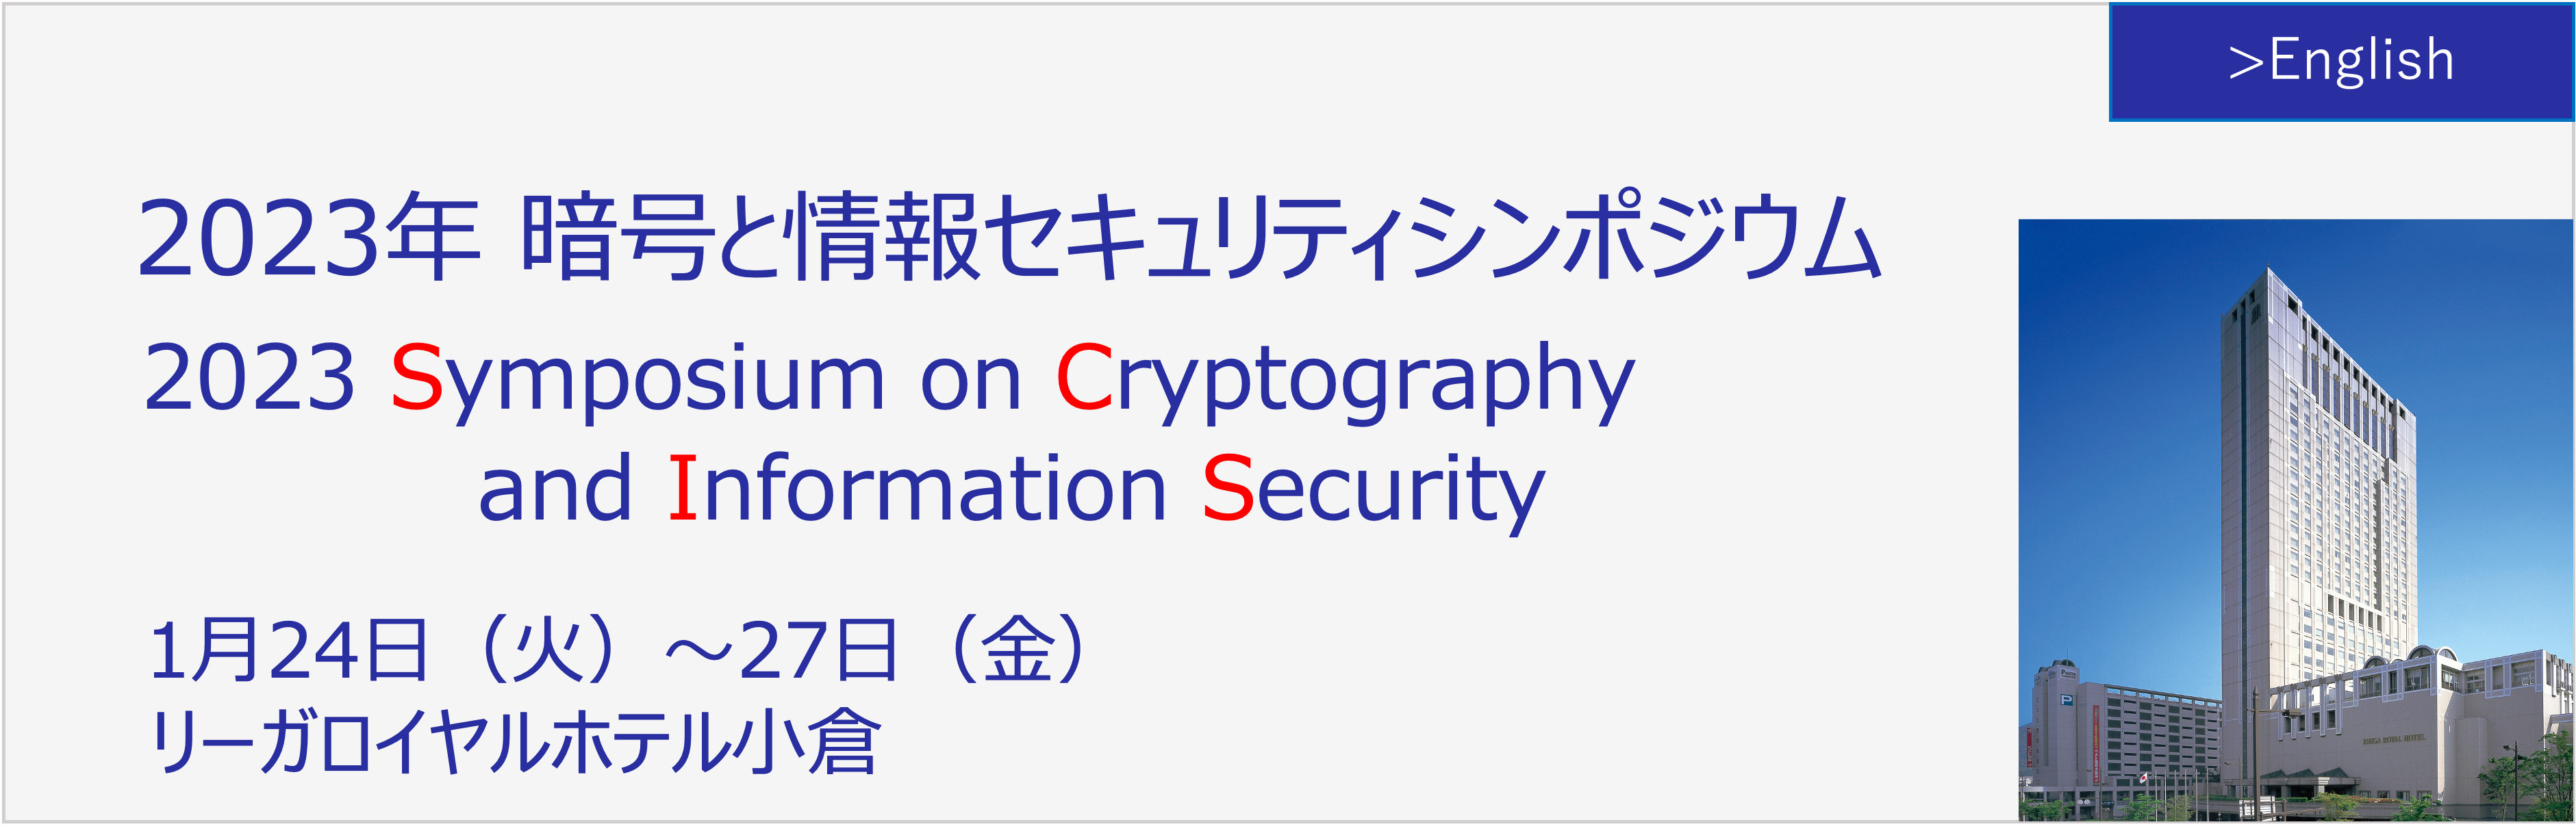 SCIS2023　2023 Symposium on Cryptography and Information Security